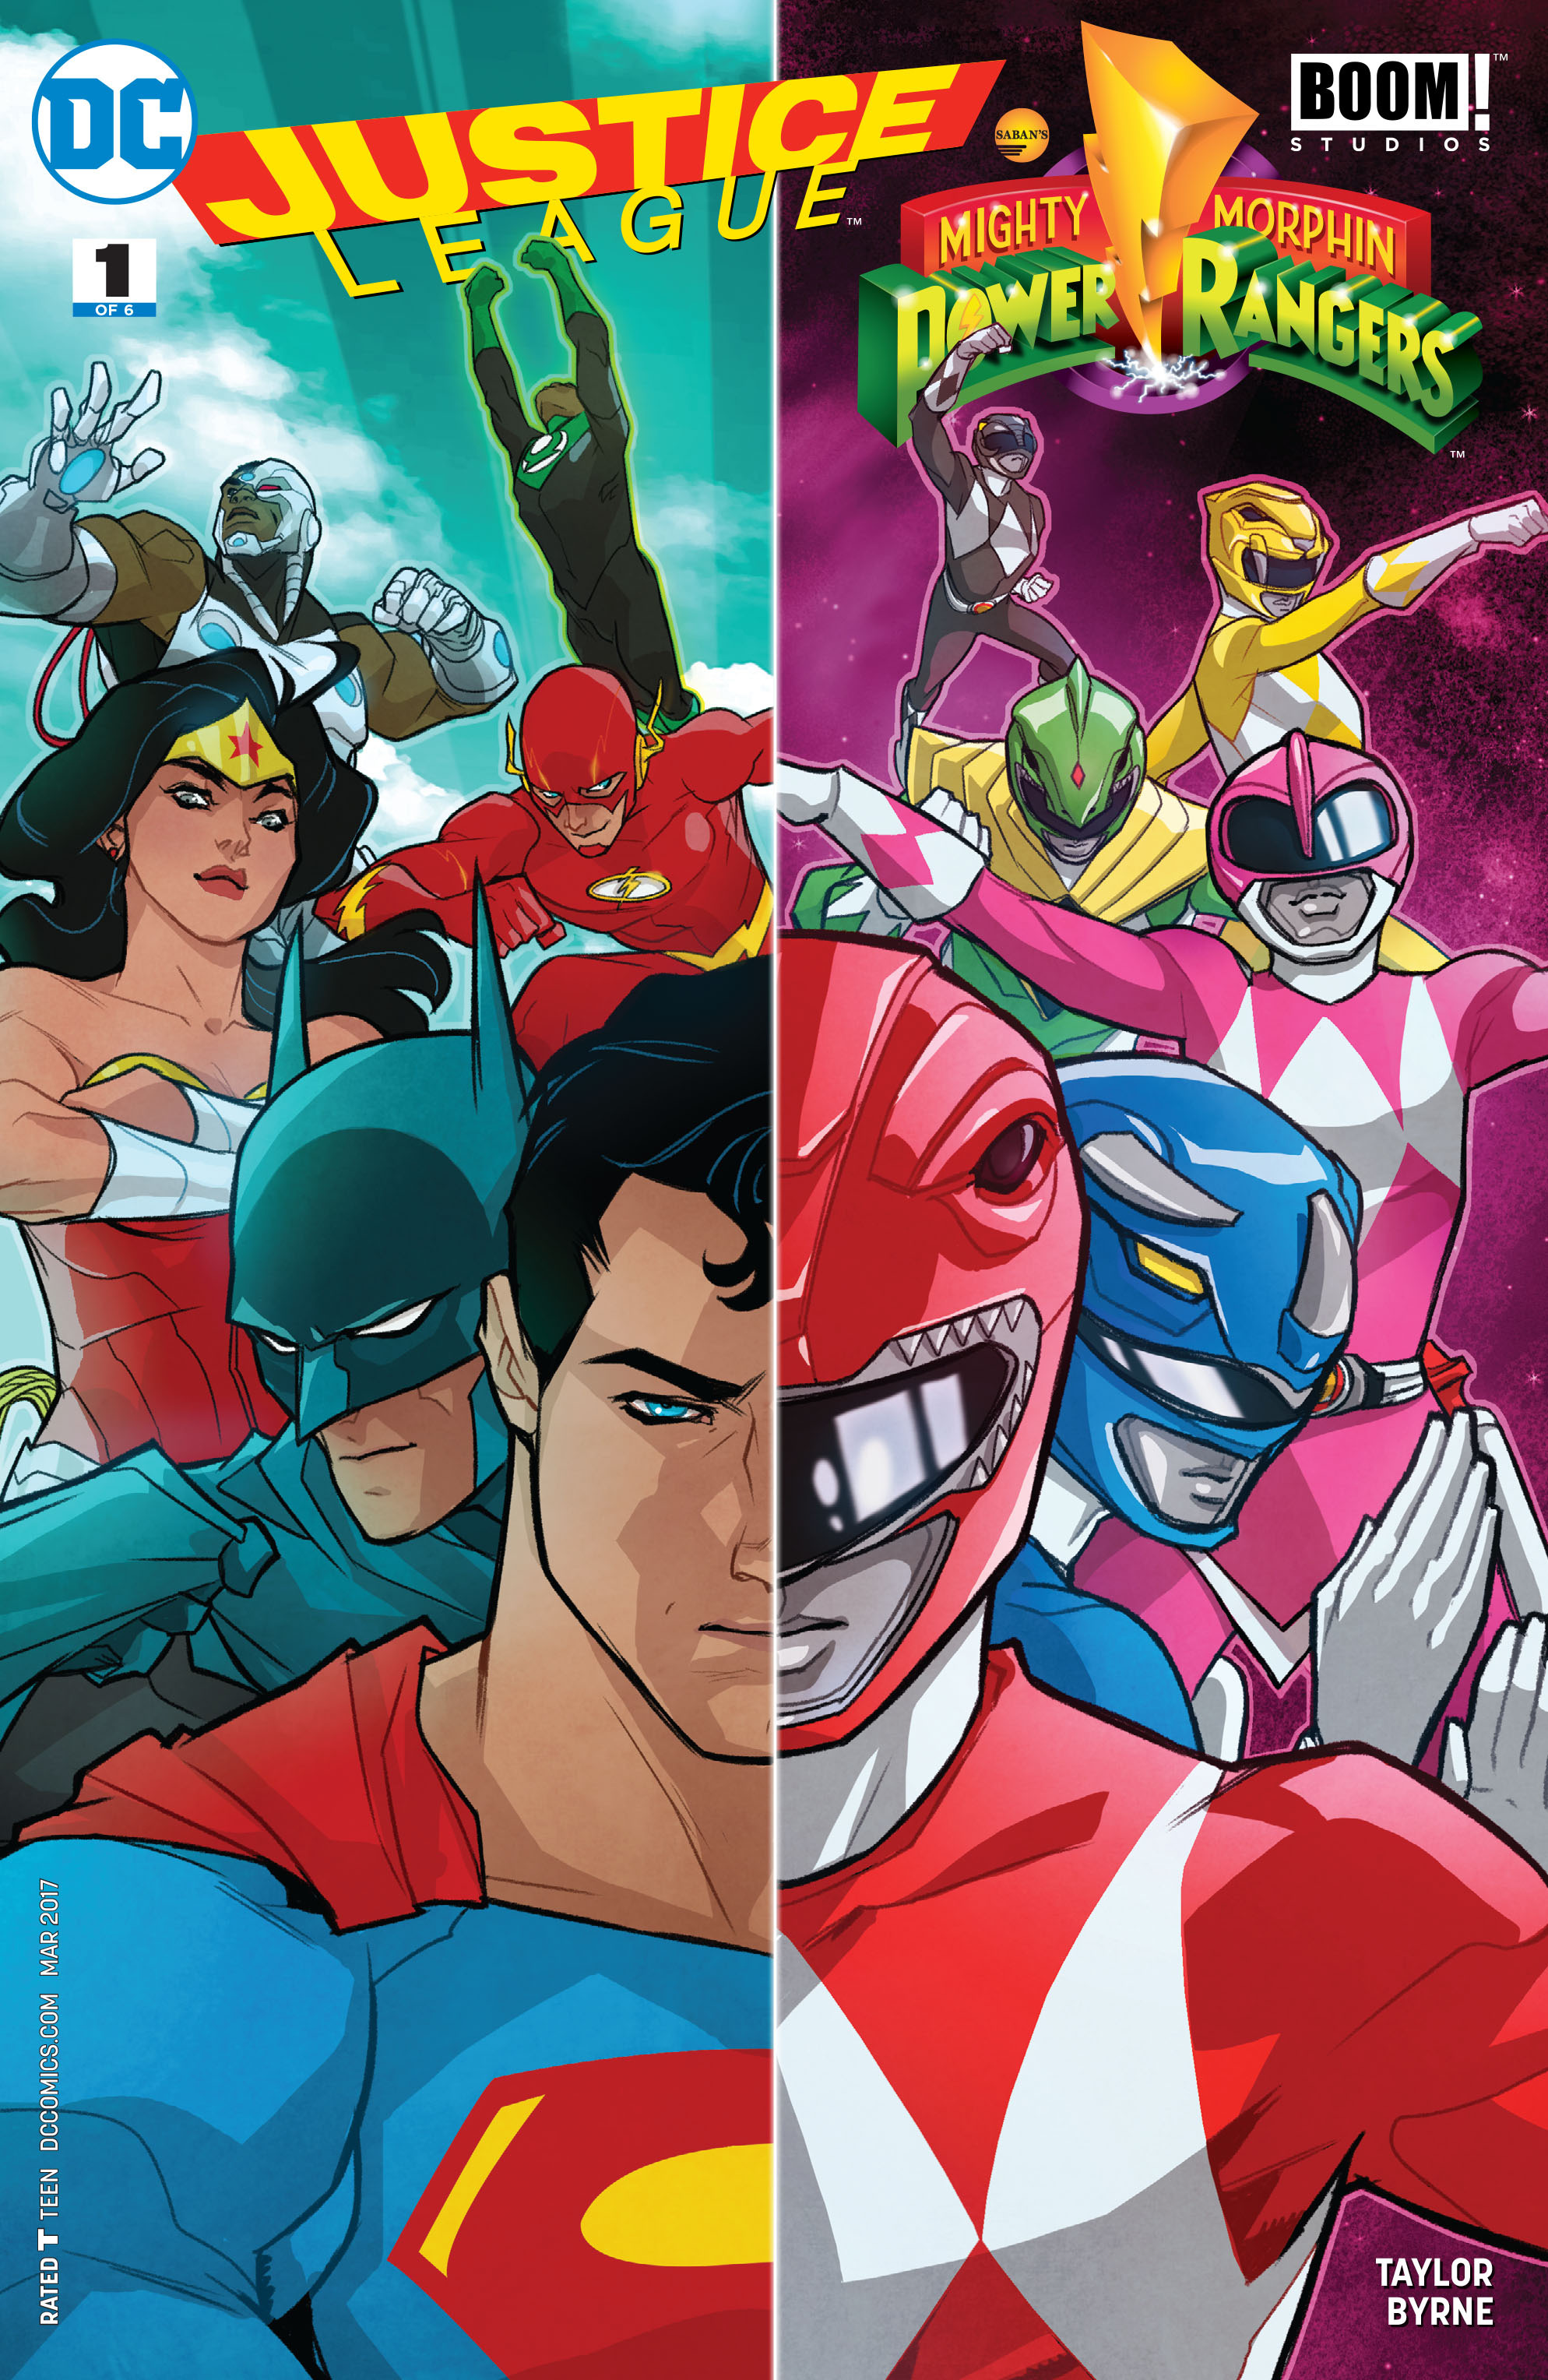 Read online Justice League/Mighty Morphin' Power Rangers comic -  Issue #1 - 1